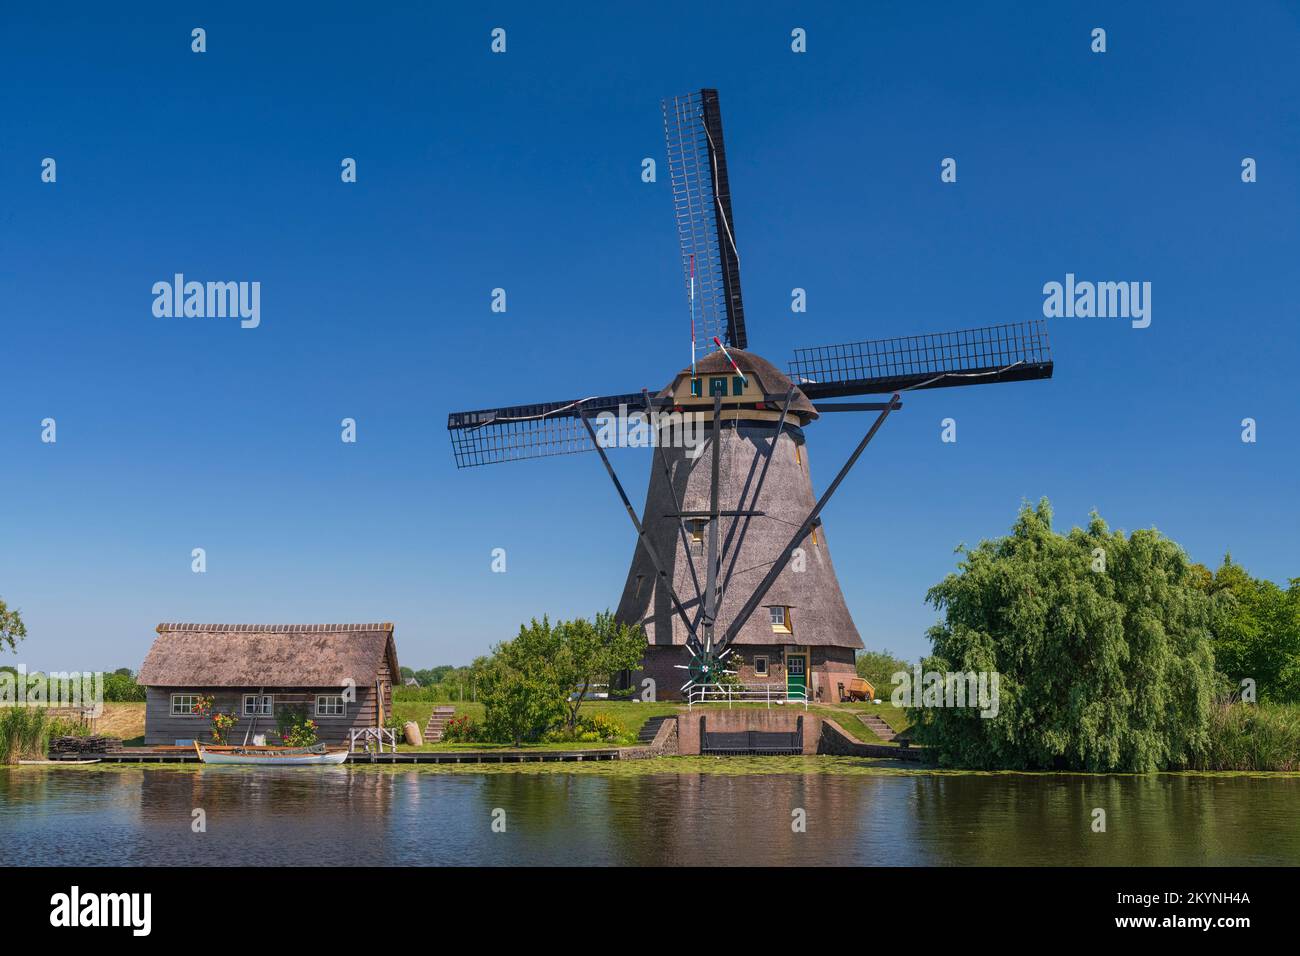 Holland, South Holland Province, Kinderdijk, One of the village's 19 Windmills built in the 18th century. Stock Photo